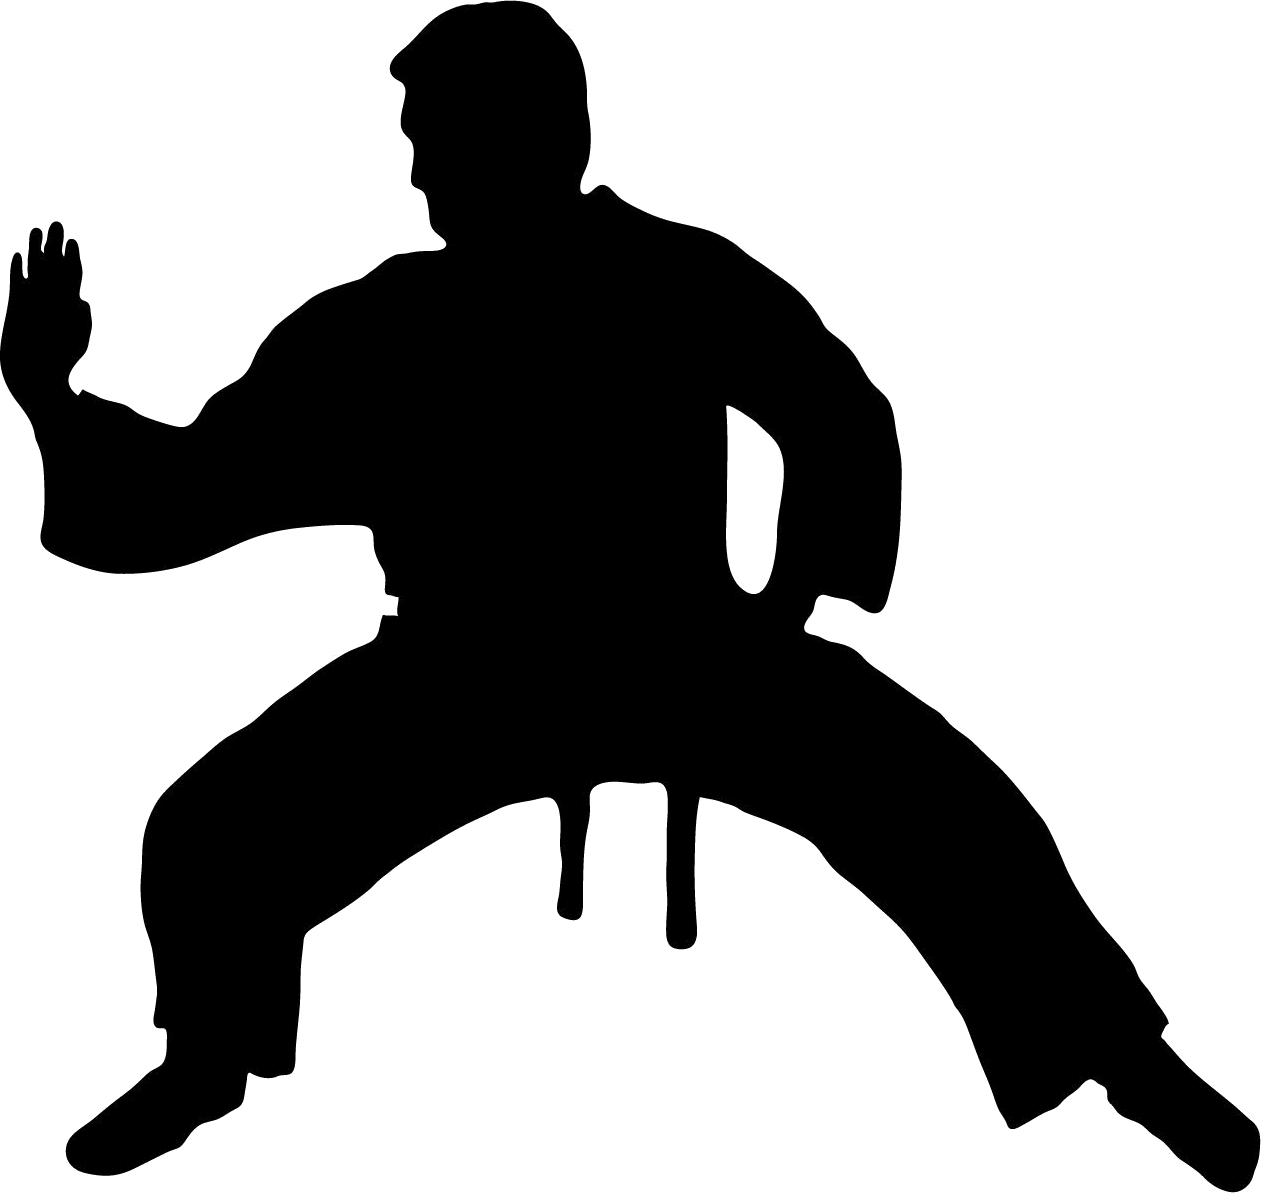 Karate Silhouette Background PNG Image - PNG Play